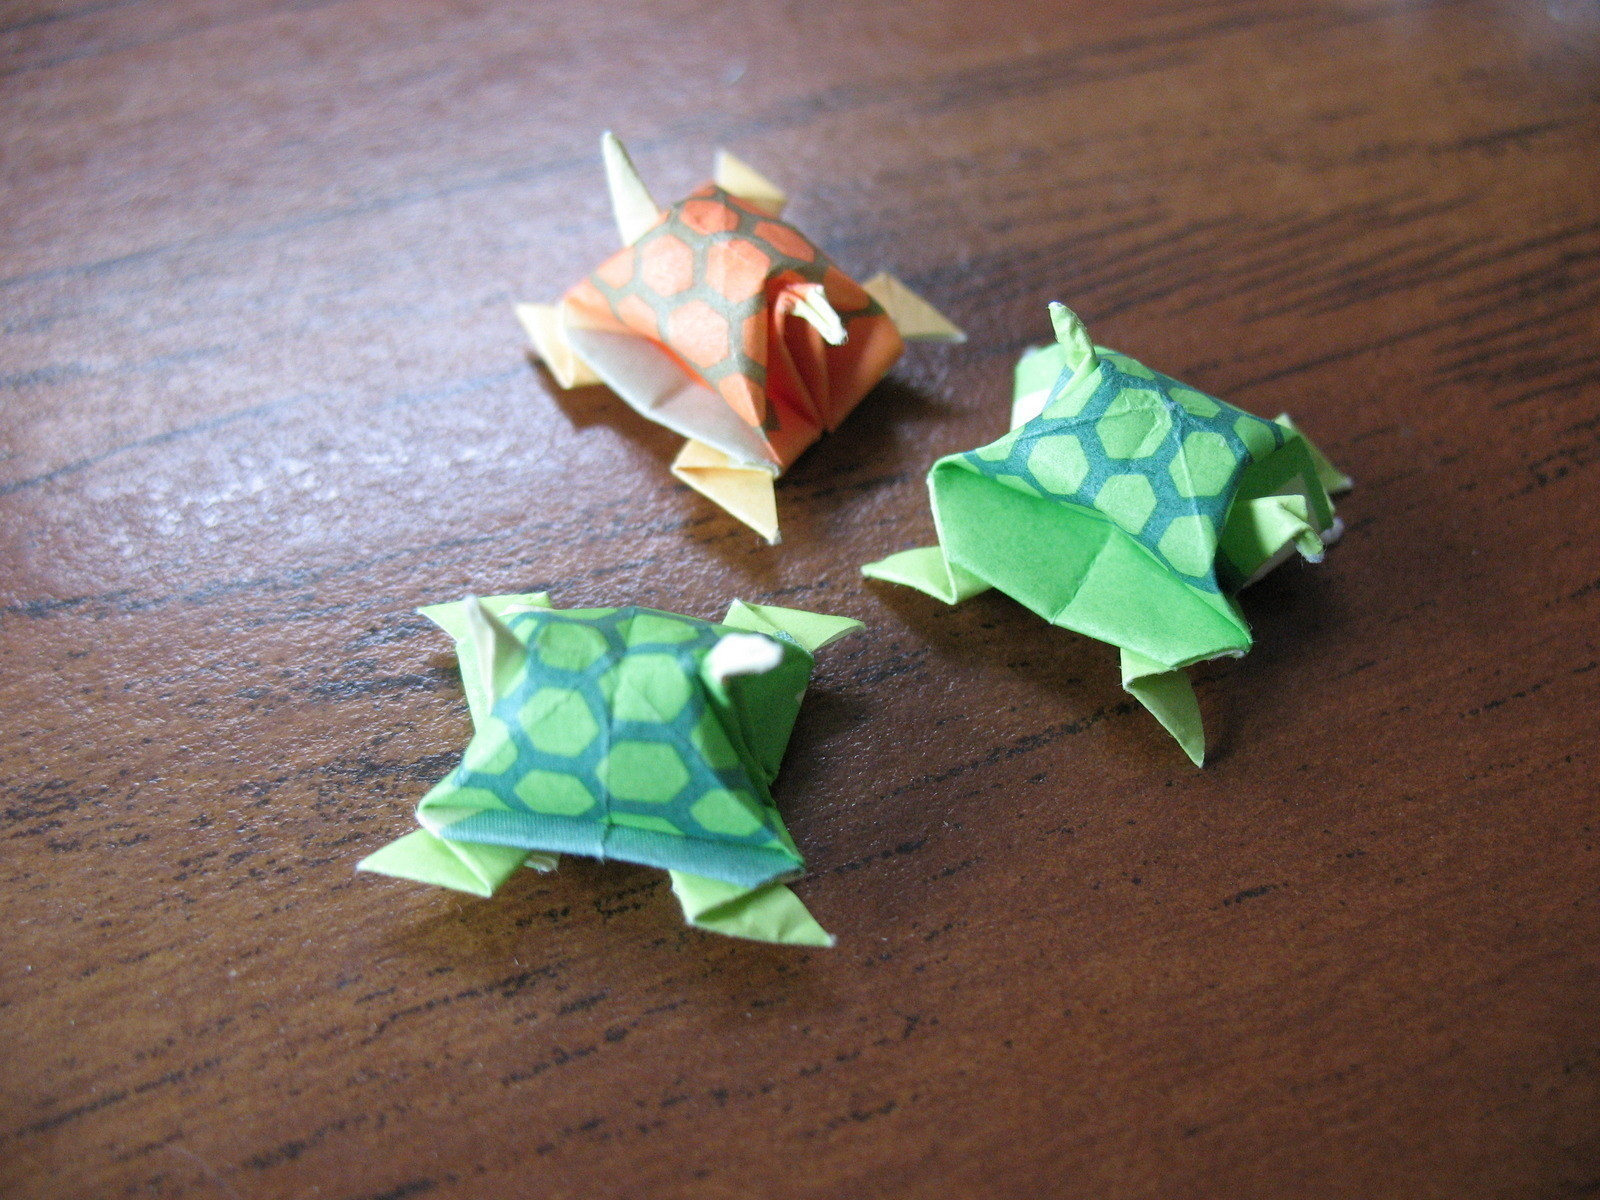 How To Make An Origami Turtle Step By Step Miniature Origami Turtles How To Fold An Origami Animal Origami